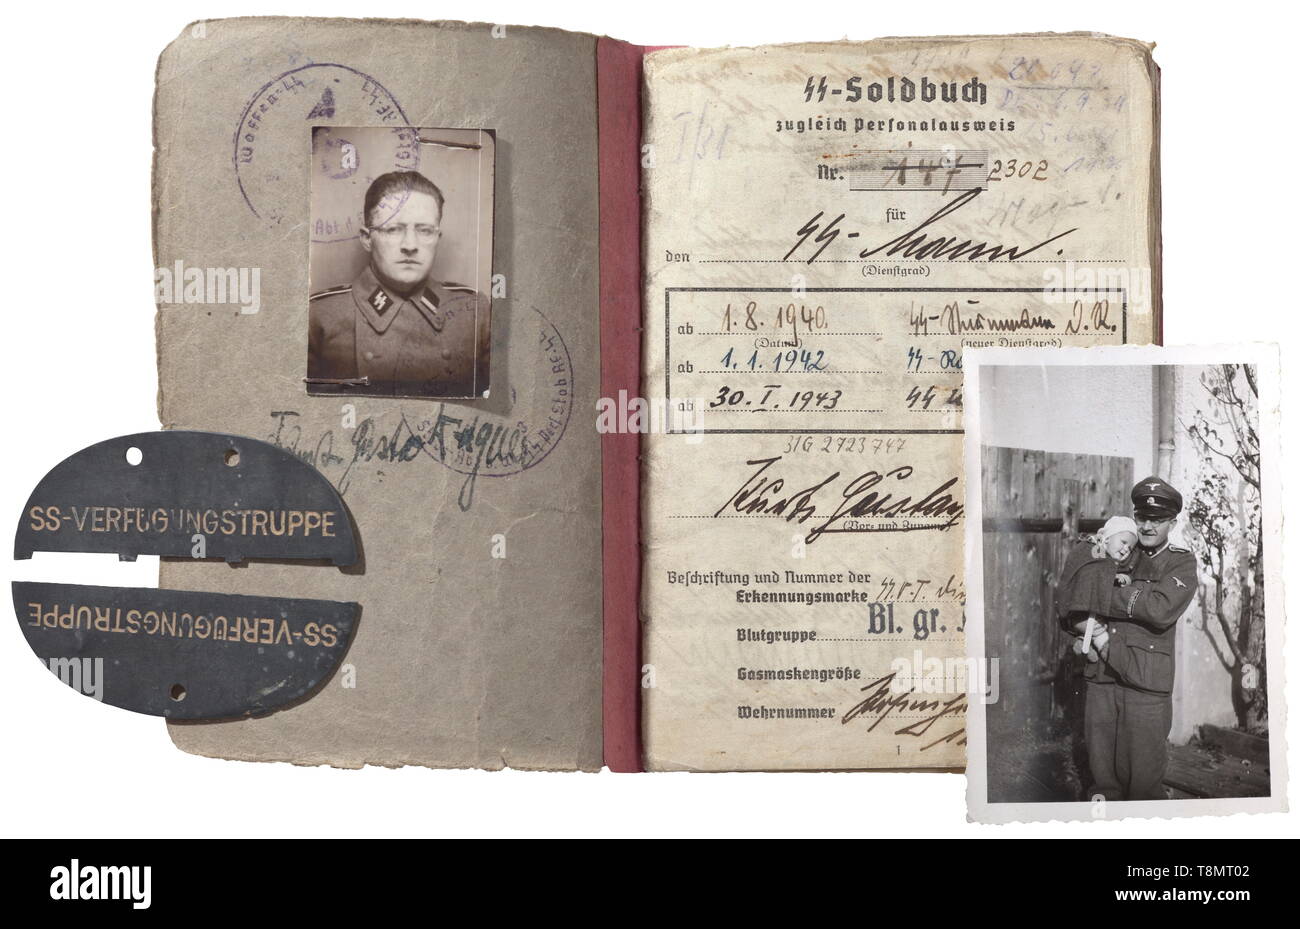 A Soldbuch, identity disc, and photo of Unterscharführer Kurt-Gustav Wagner - on the personal staff of Reichsführer-SS Heinrich Himmler The Soldbuch (paybook) with photo id, issued on 20 September 1939 while assigned to '4. (M.G.)/4.SS-Totenkopfstandarte Ostmark'. With numerous entries like promotions, transfers (personal staff of the Reichsführer, Steinhöring 'Lebensborn'), units, equipment issues, vaccinations, hospital stays, furloughs and more. Included is his identity disc (broken) with designation 'SS-Verfügungstruppe - DIV. 2302' and a photo as an Unterscharführer. H, Editorial-Use-Only Stock Photo